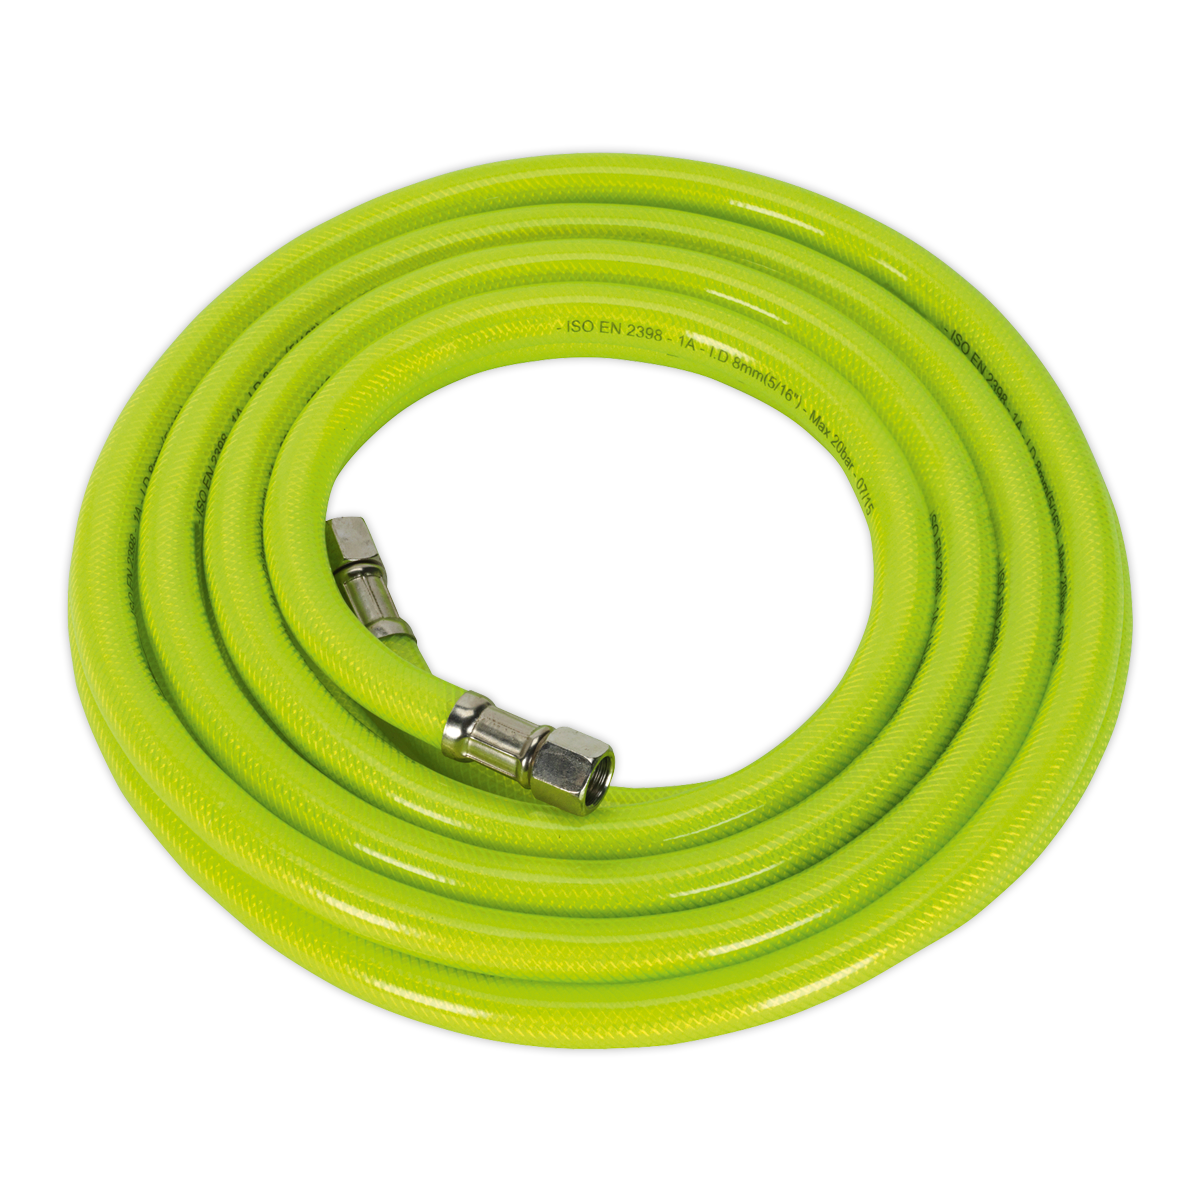 Sealey 5m x Ø8mm High-Visibility Air Hose with 1/4"BSP Unions AHFC5